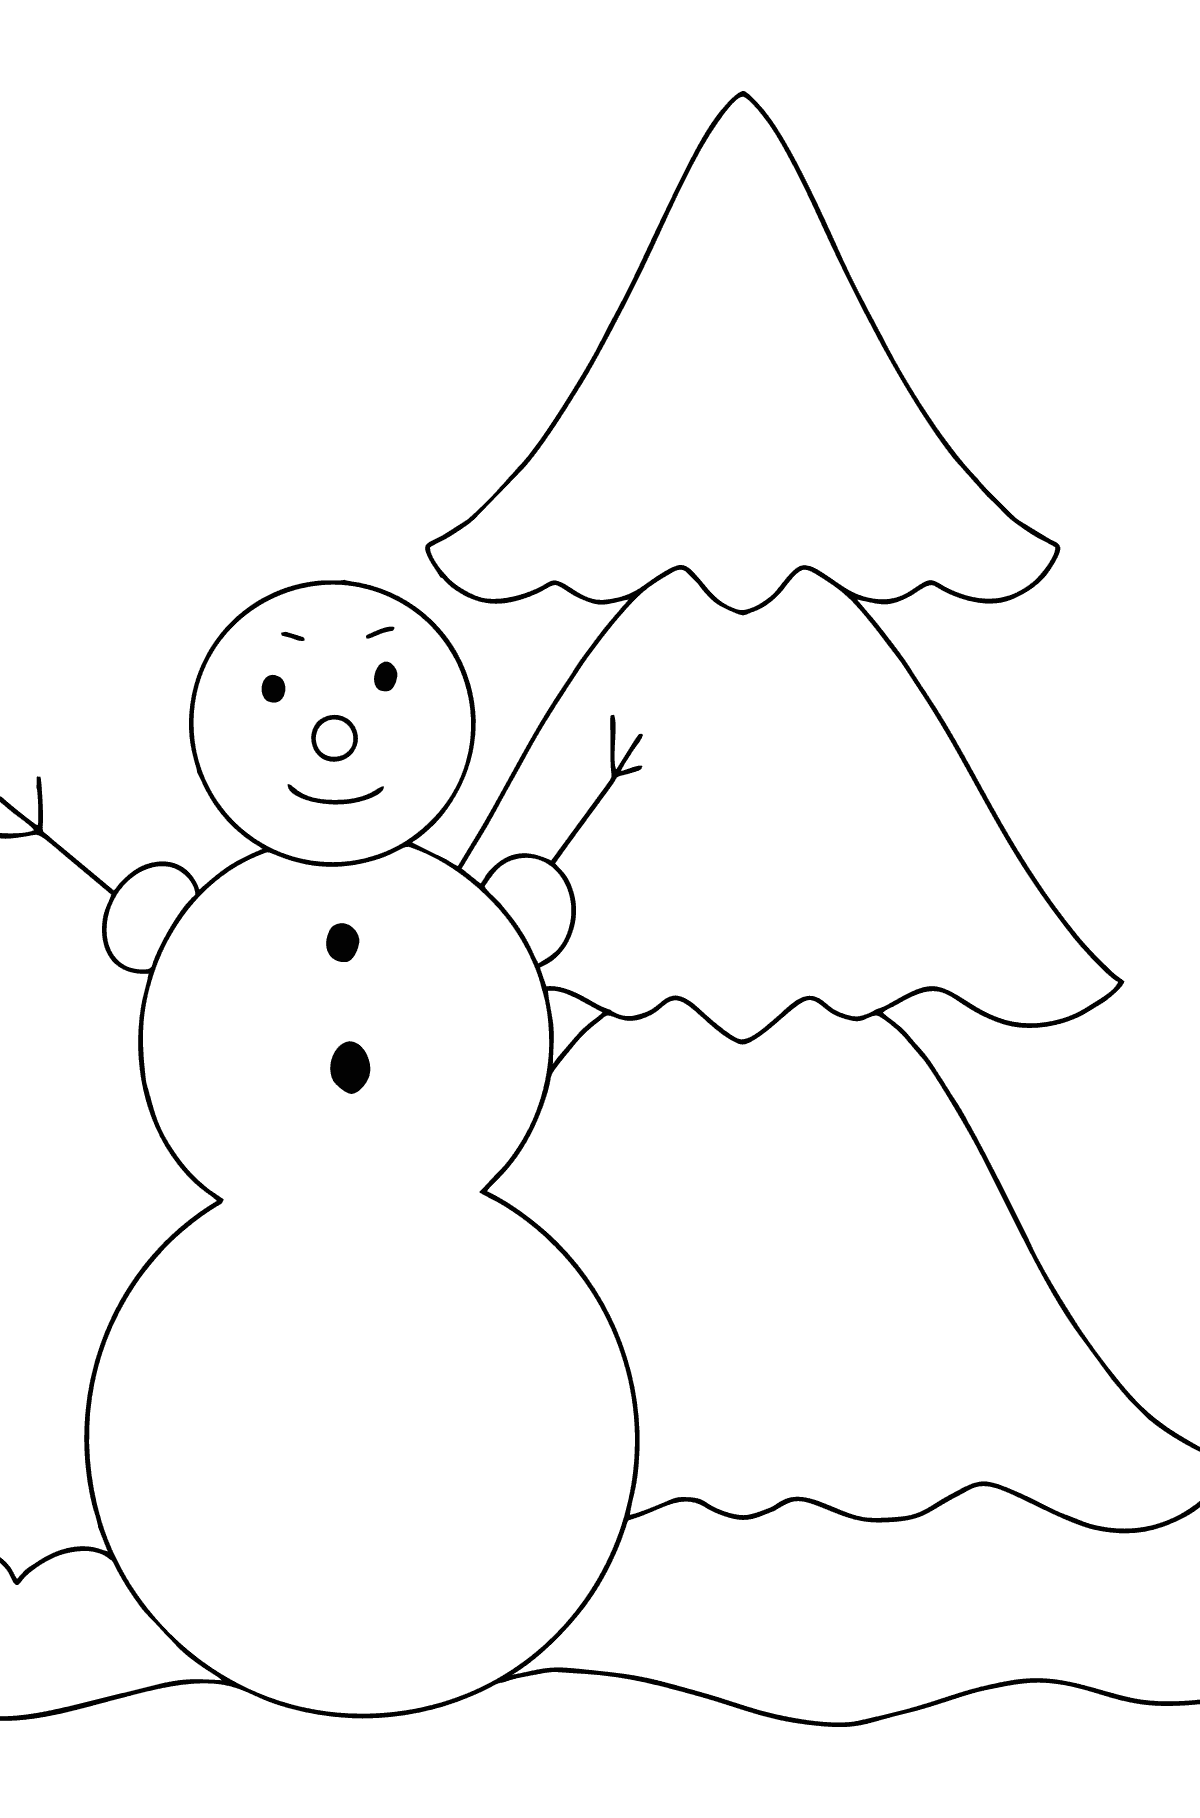 Snowman coloring page for kids - Coloring Pages for Kids